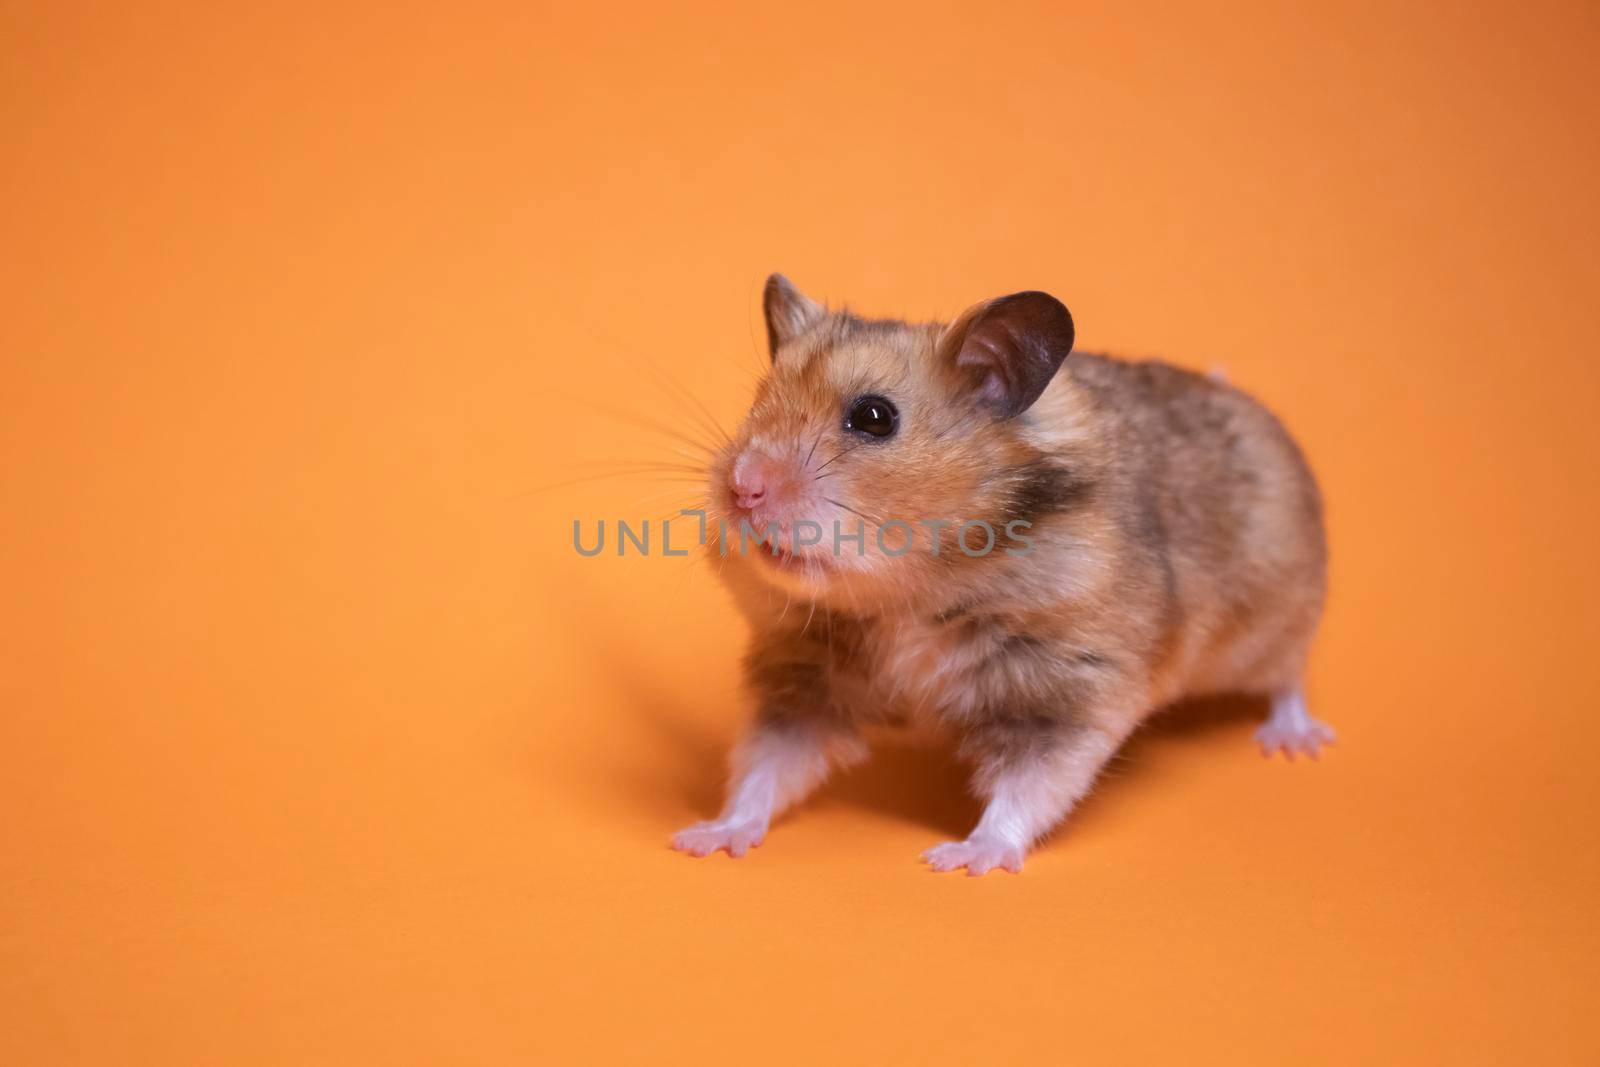 brown hamster mouse isolated on orange background. pest, pet